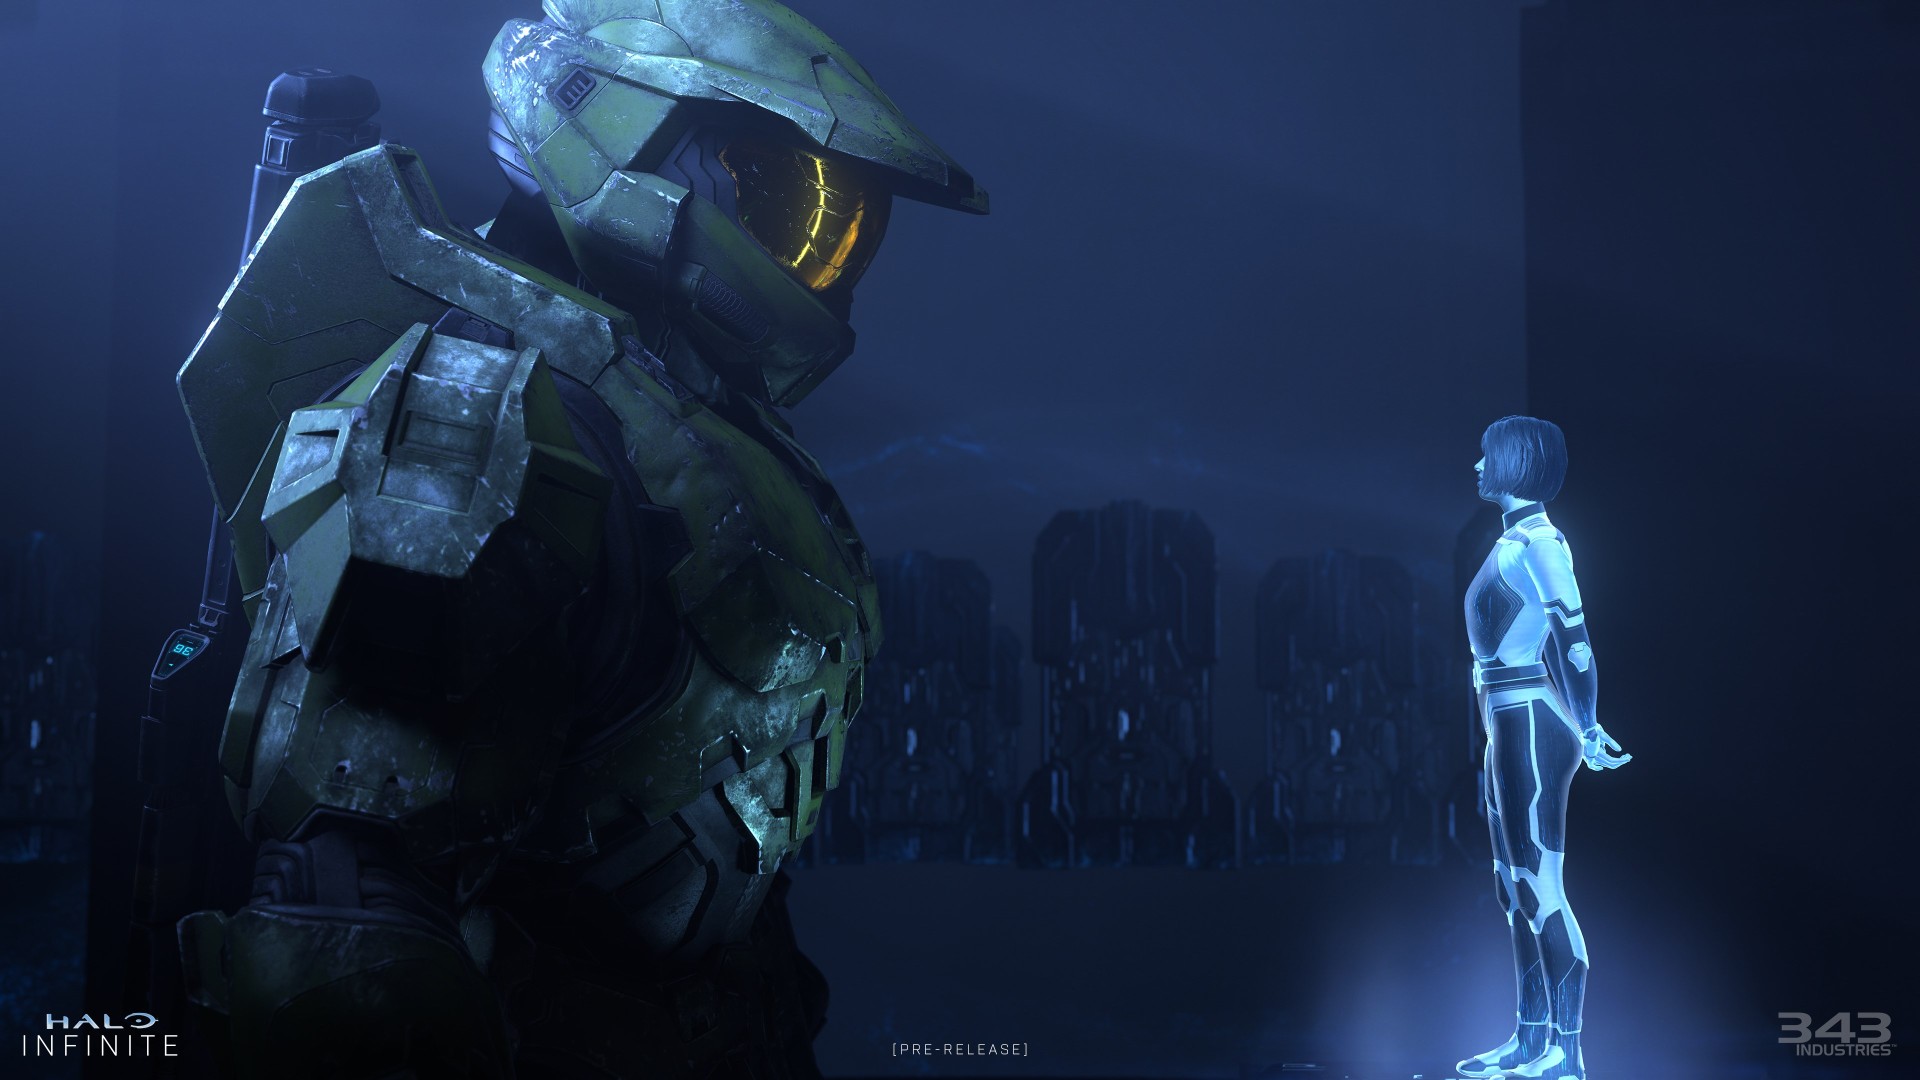 Halo Infinite (Campaign) – December 8 – Optimized for Xbox Series X|S – Xbox Game Pass